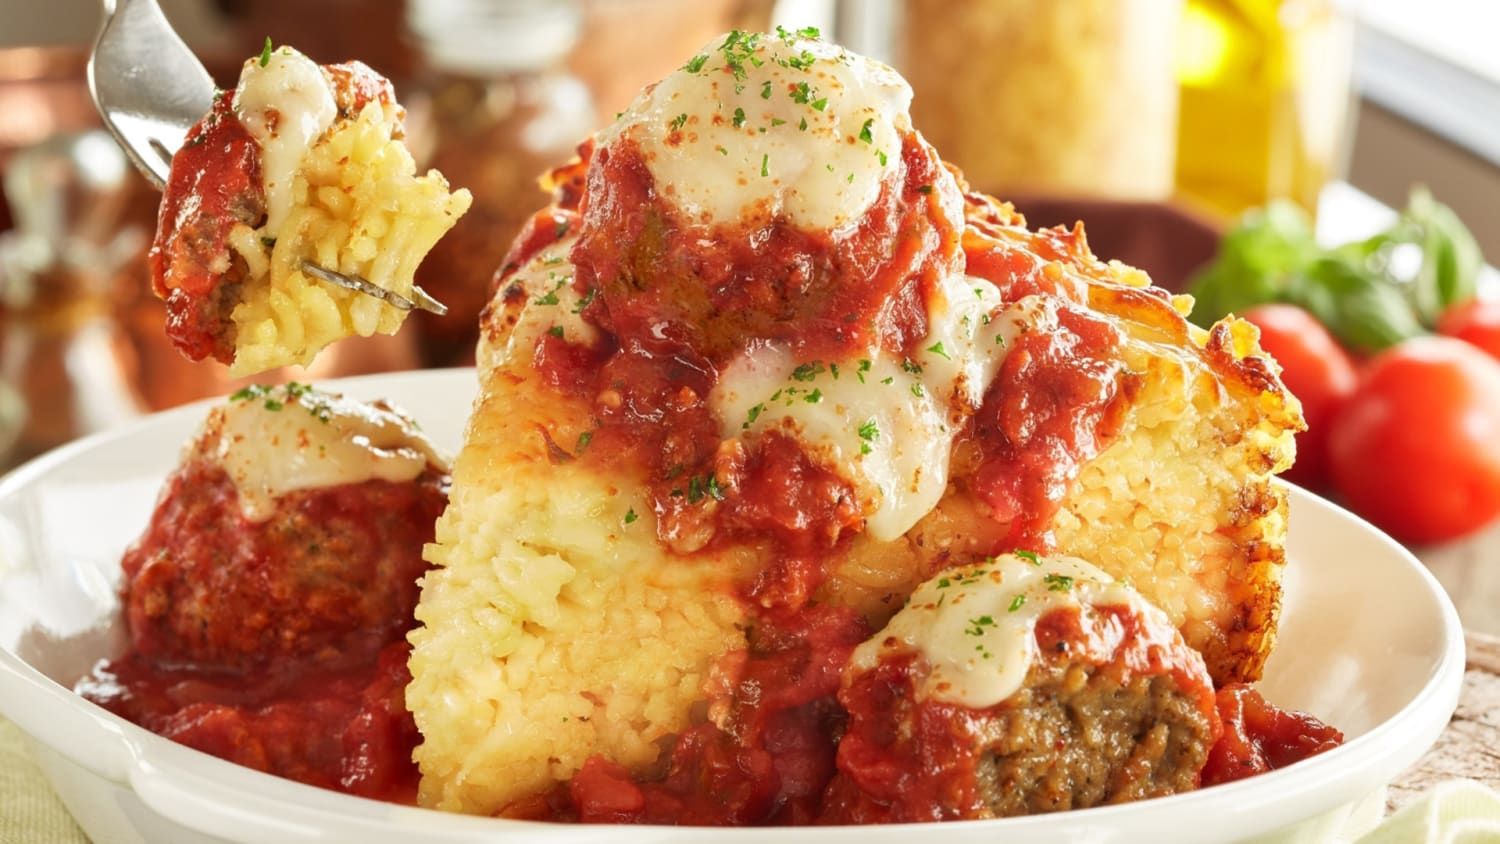 Olive Garden Adds Spaghetti Pies New Breadstick Sandwiches To Menu